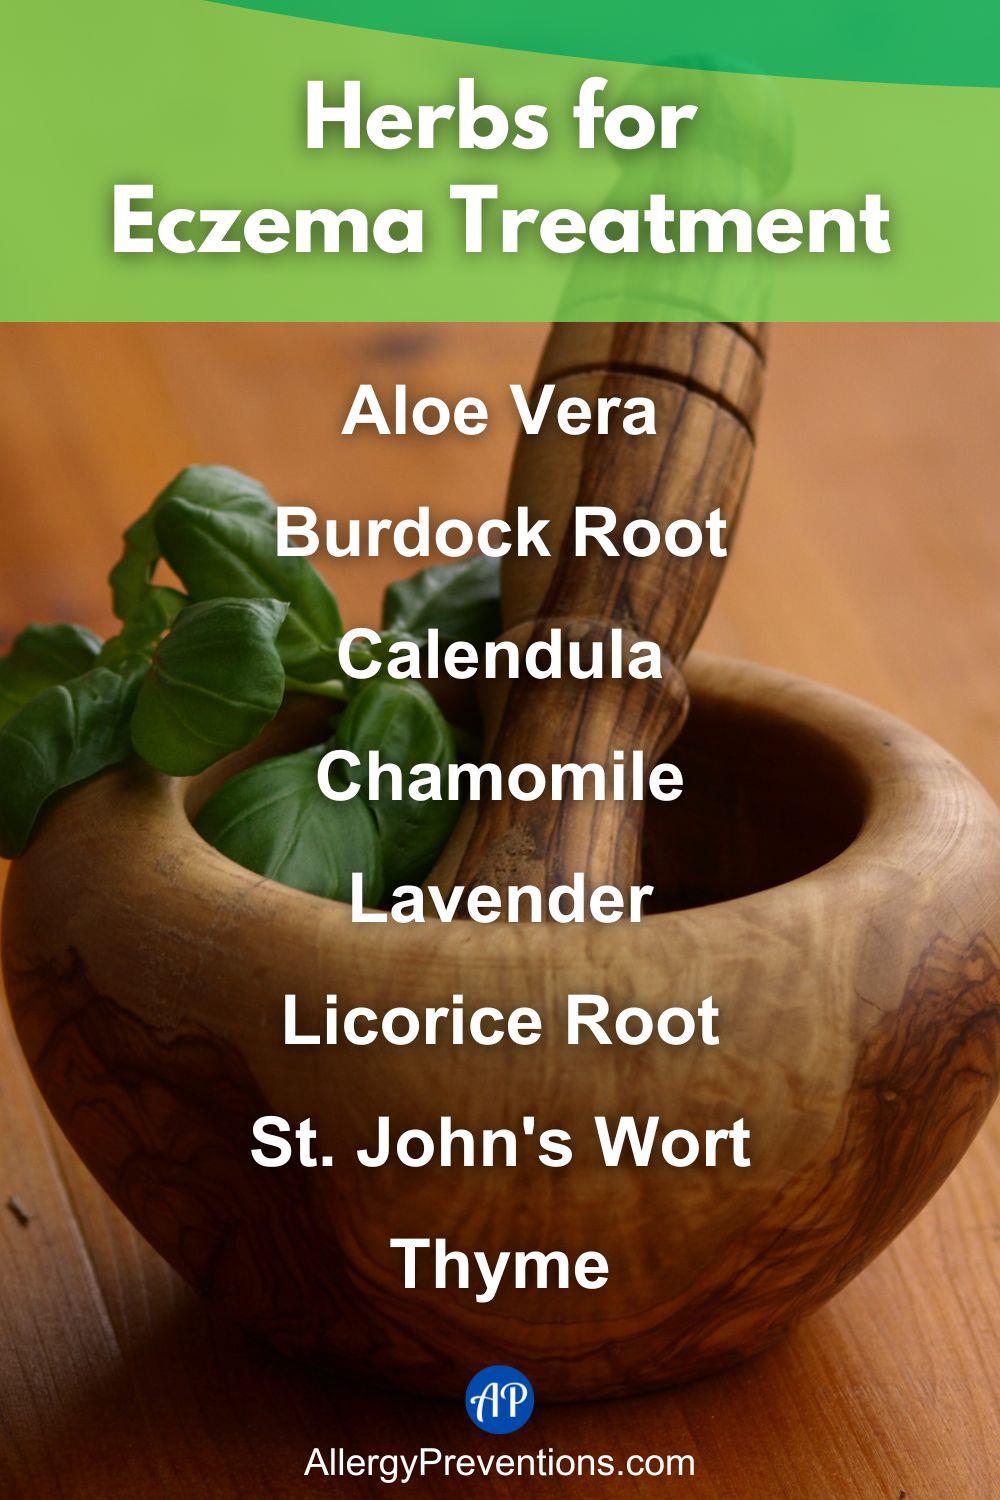 Herbs for eczema treatment infographic. The herbs that have shown to naturally complement eczema treatment are: Aloe Vera, Burdock Root, Calendula, Chamomile, Lavender, Licorice Root, St. John's Wort, and Thyme.